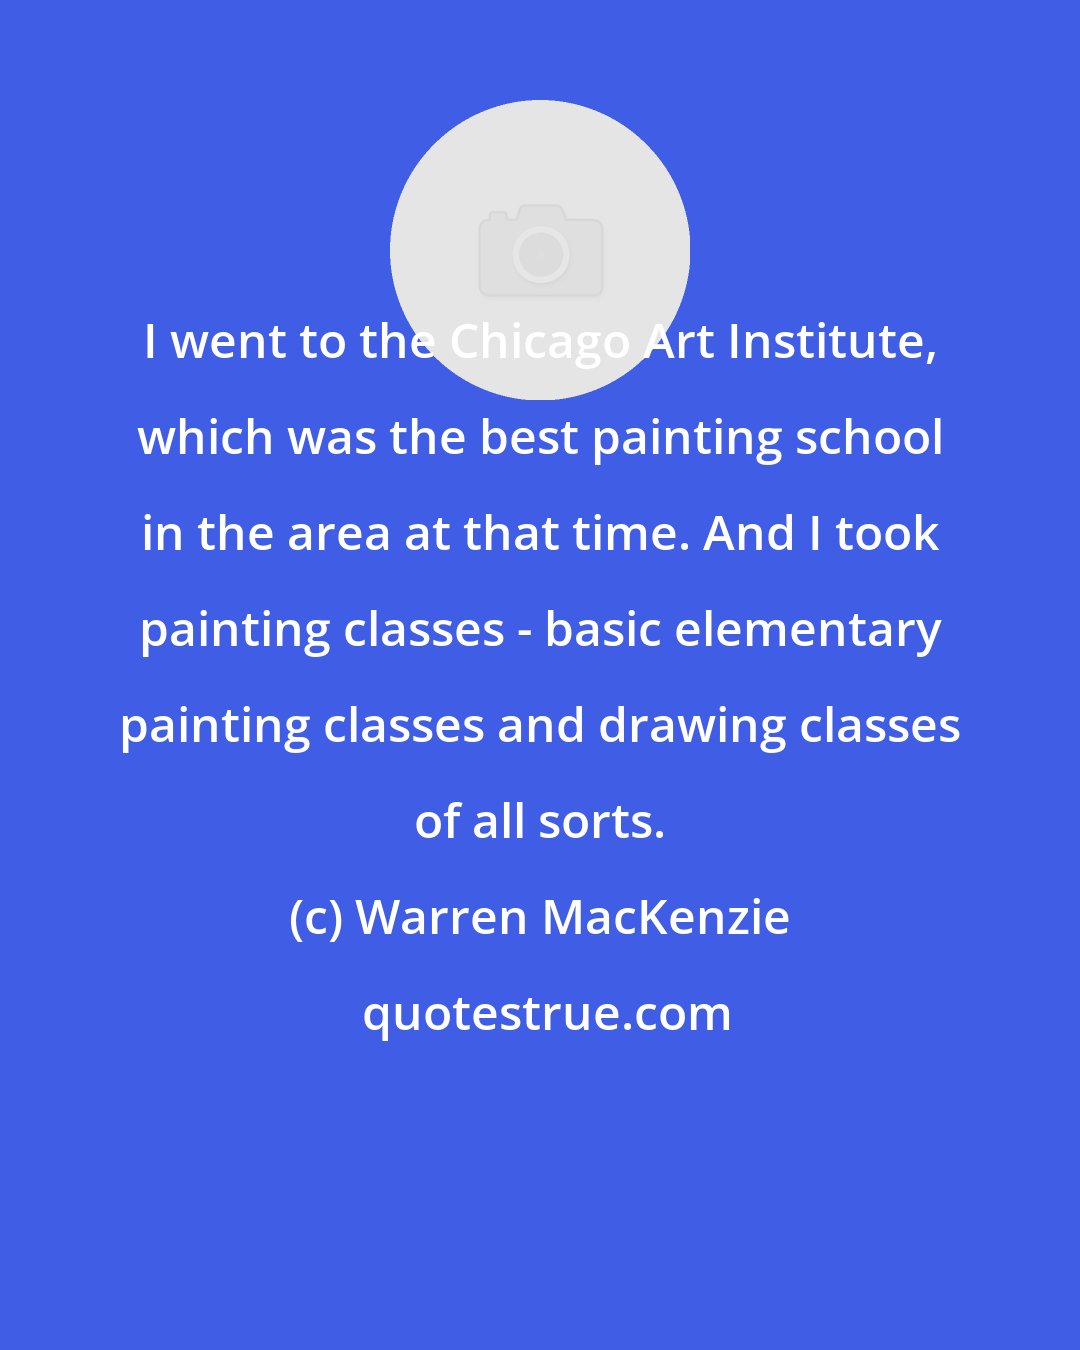 Warren MacKenzie: I went to the Chicago Art Institute, which was the best painting school in the area at that time. And I took painting classes - basic elementary painting classes and drawing classes of all sorts.